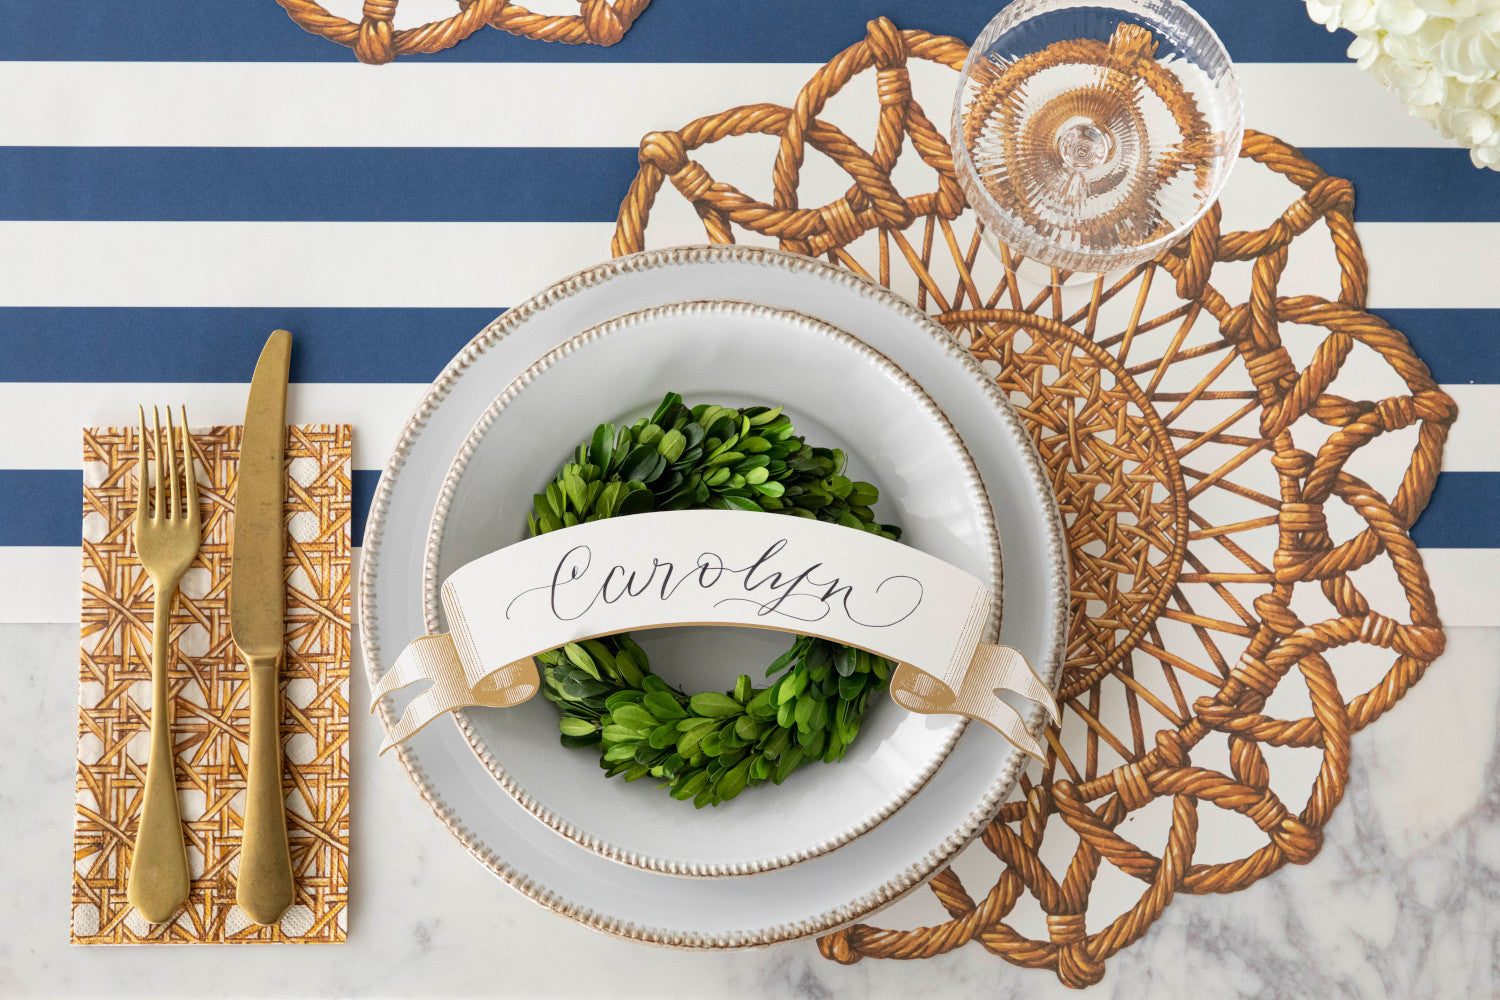 The Die-cut Rattan Weave Placemat under an elegant place setting, from above.